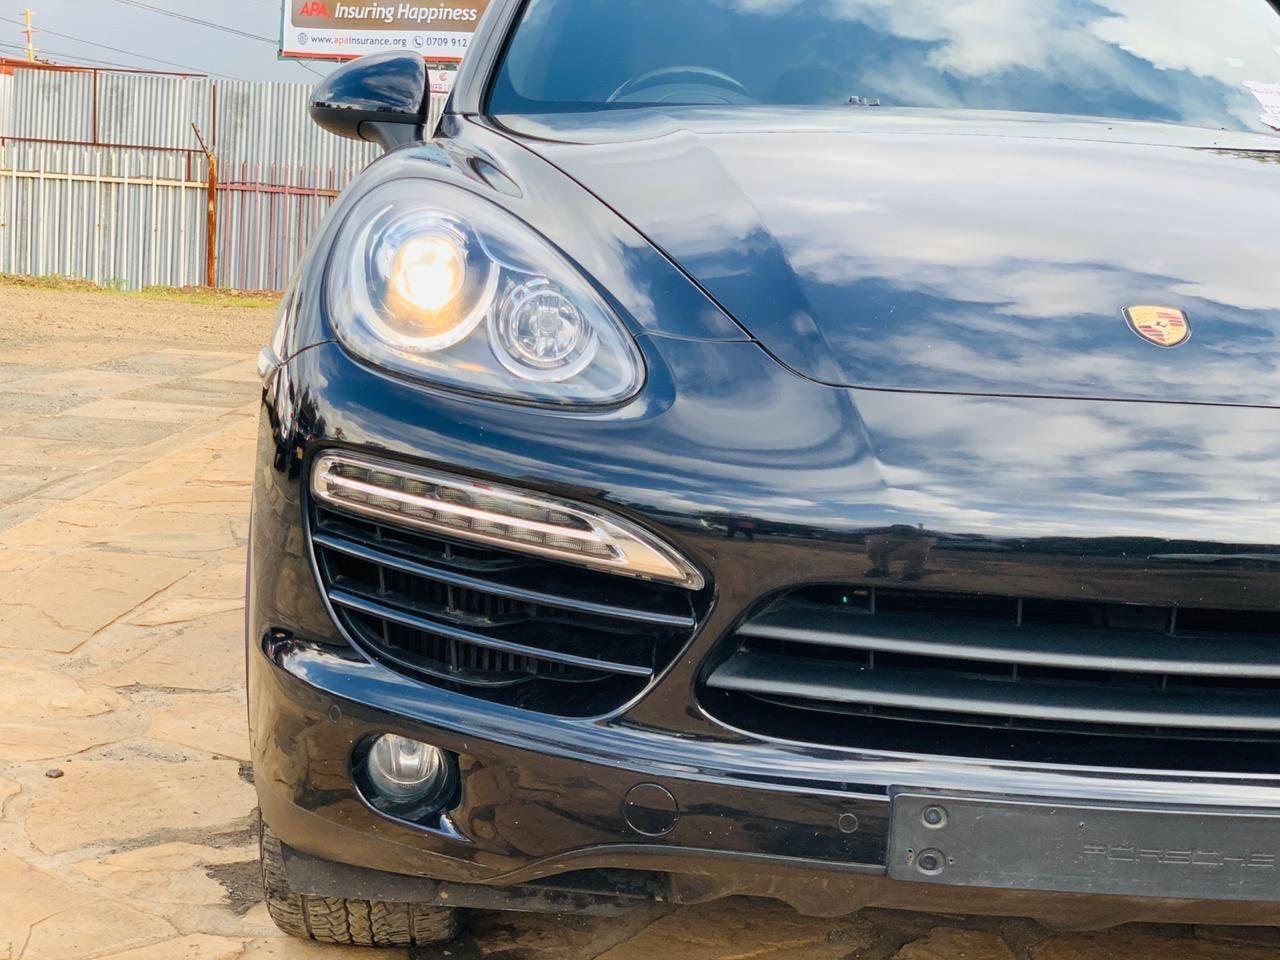 2012 Porsche Cayenne Wow hire purchase Trade in OK as New